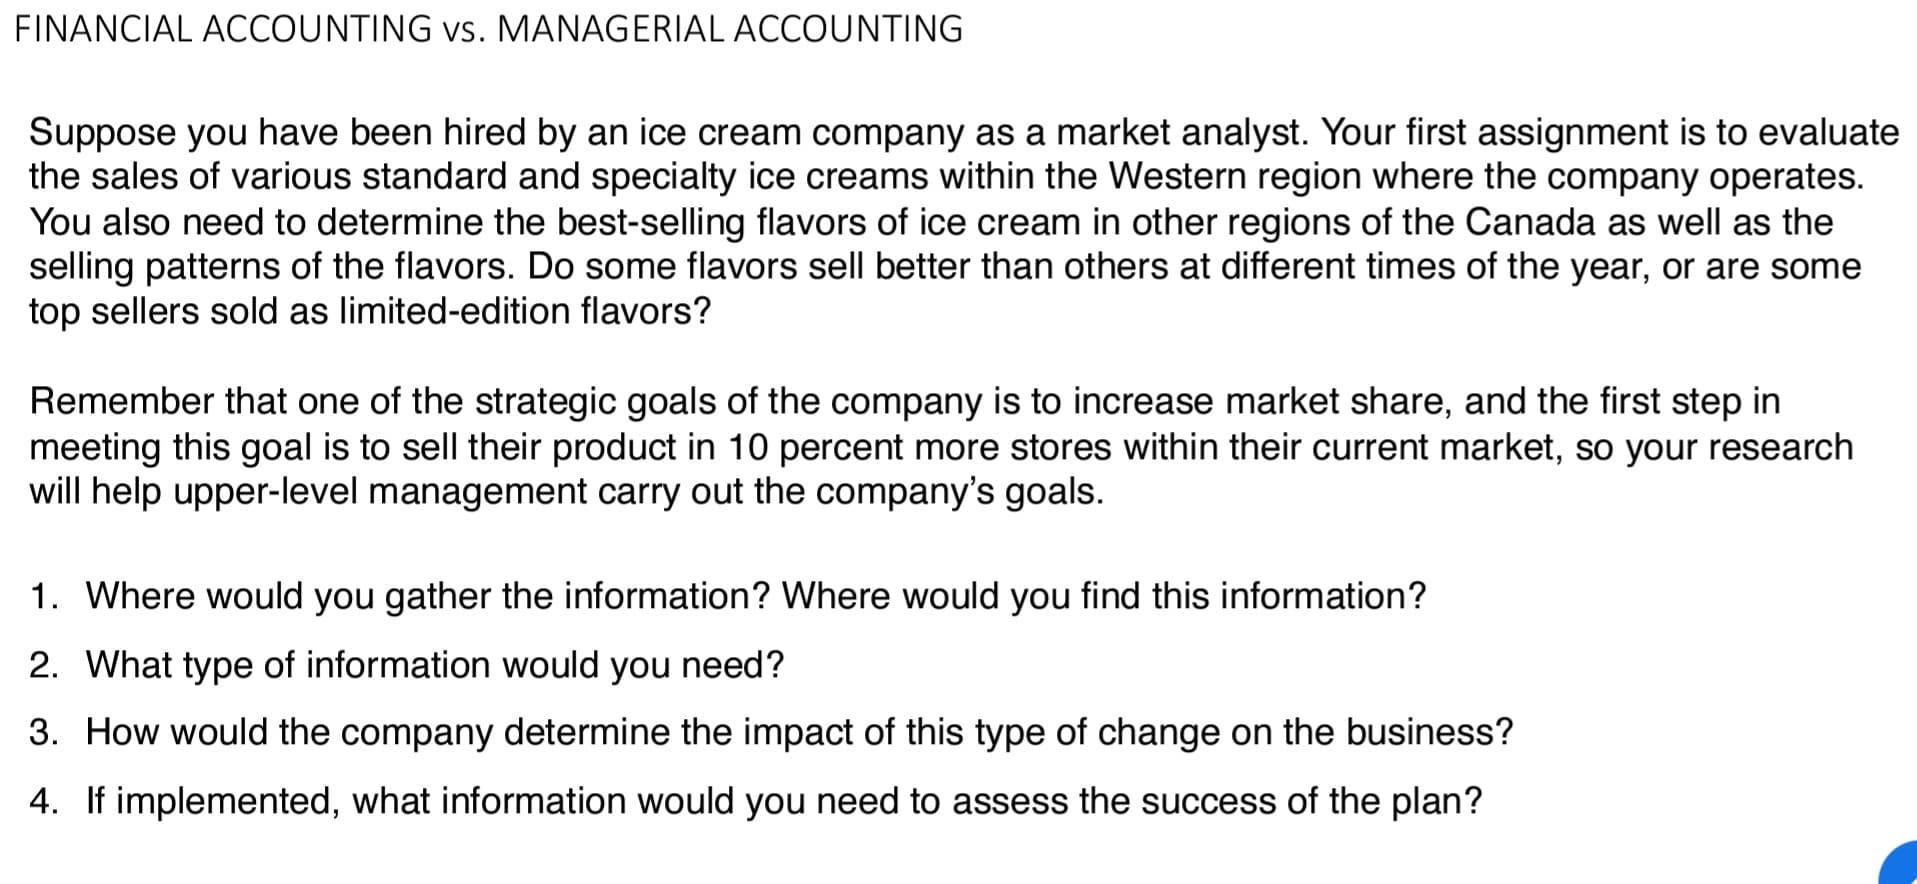 FINANCIAL ACCOUNTING vs. MANAGERIAL ACCOUNTING
Suppose you have been hired by an ice cream company as a market analyst. Your first assignment is to evaluate
the sales of various standard and specialty ice creams within the Western region where the company operates.
You also need to determine the best-selling flavors of ice cream in other regions of the Canada as well as the
selling patterns of the flavors. Do some flavors sell better than others at different times of the year, or are some
top sellers sold as limited-edition flavors?
Remember that one of the strategic goals of the company is to increase market share, and the first step in
meeting this goal is to sell their product in 10 percent more stores within their current market, so your research
will help upper-level management carry out the company's goals.
1. Where would you gather the information? Where would you find this information?
2. What type of information would you need?
3. How would the company determine the impact of this type of change on the business?
4. If implemented, what information would you need to assess the success of the plan?